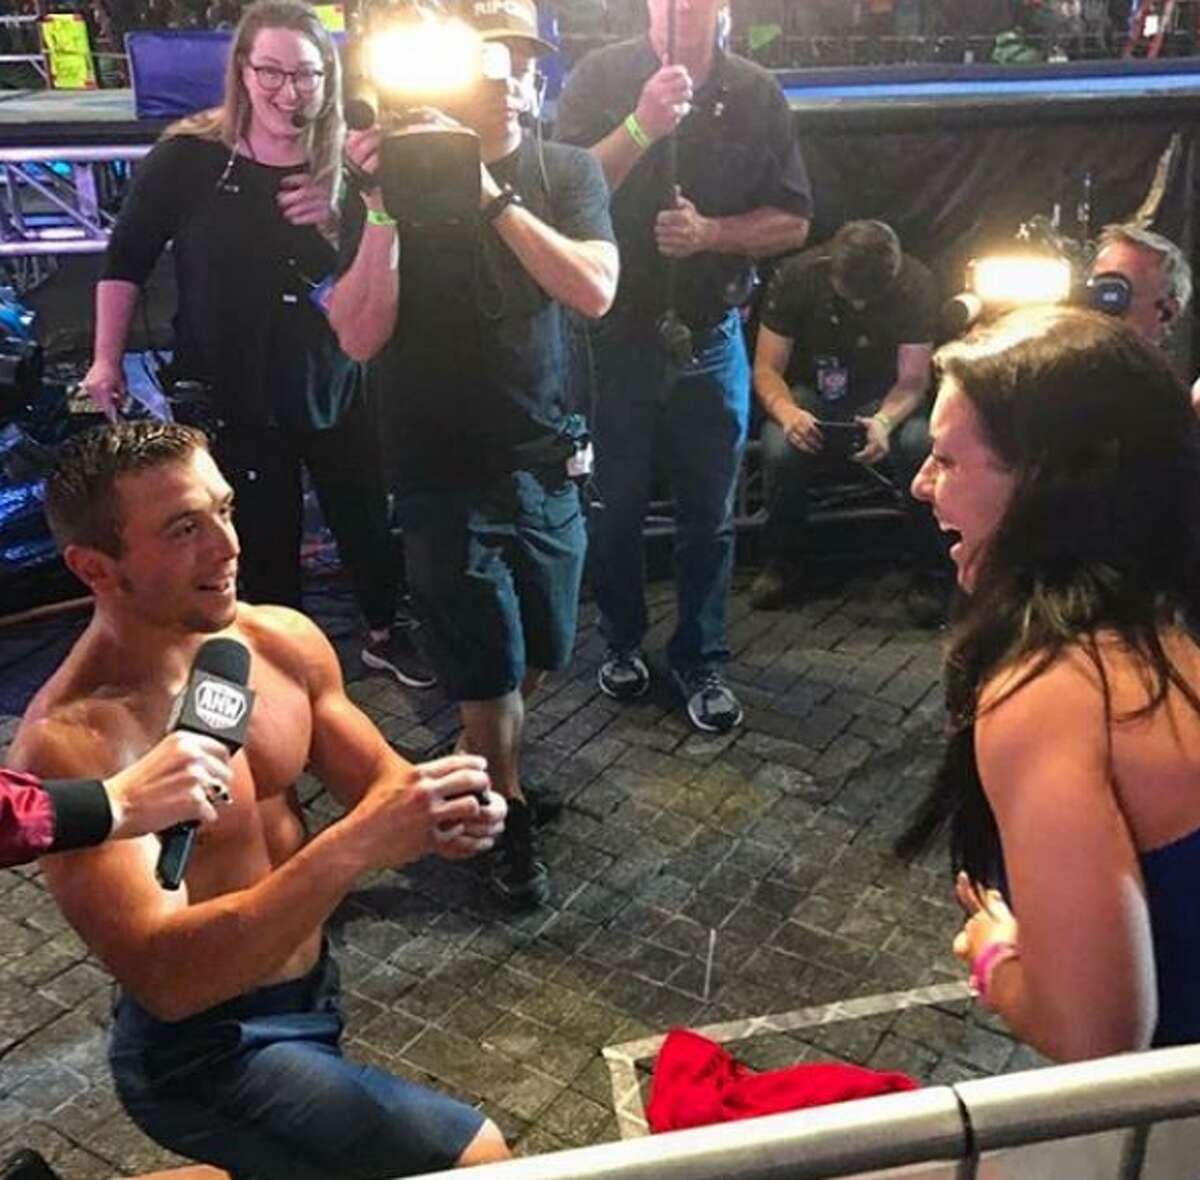 From swinging through American Ninja Warrior's overhead rings to pulling out an engagement ring, Maxo Soria picked San Antonio to make two dreams come true in one night when he ran the course and proposed to Paris Ryder.